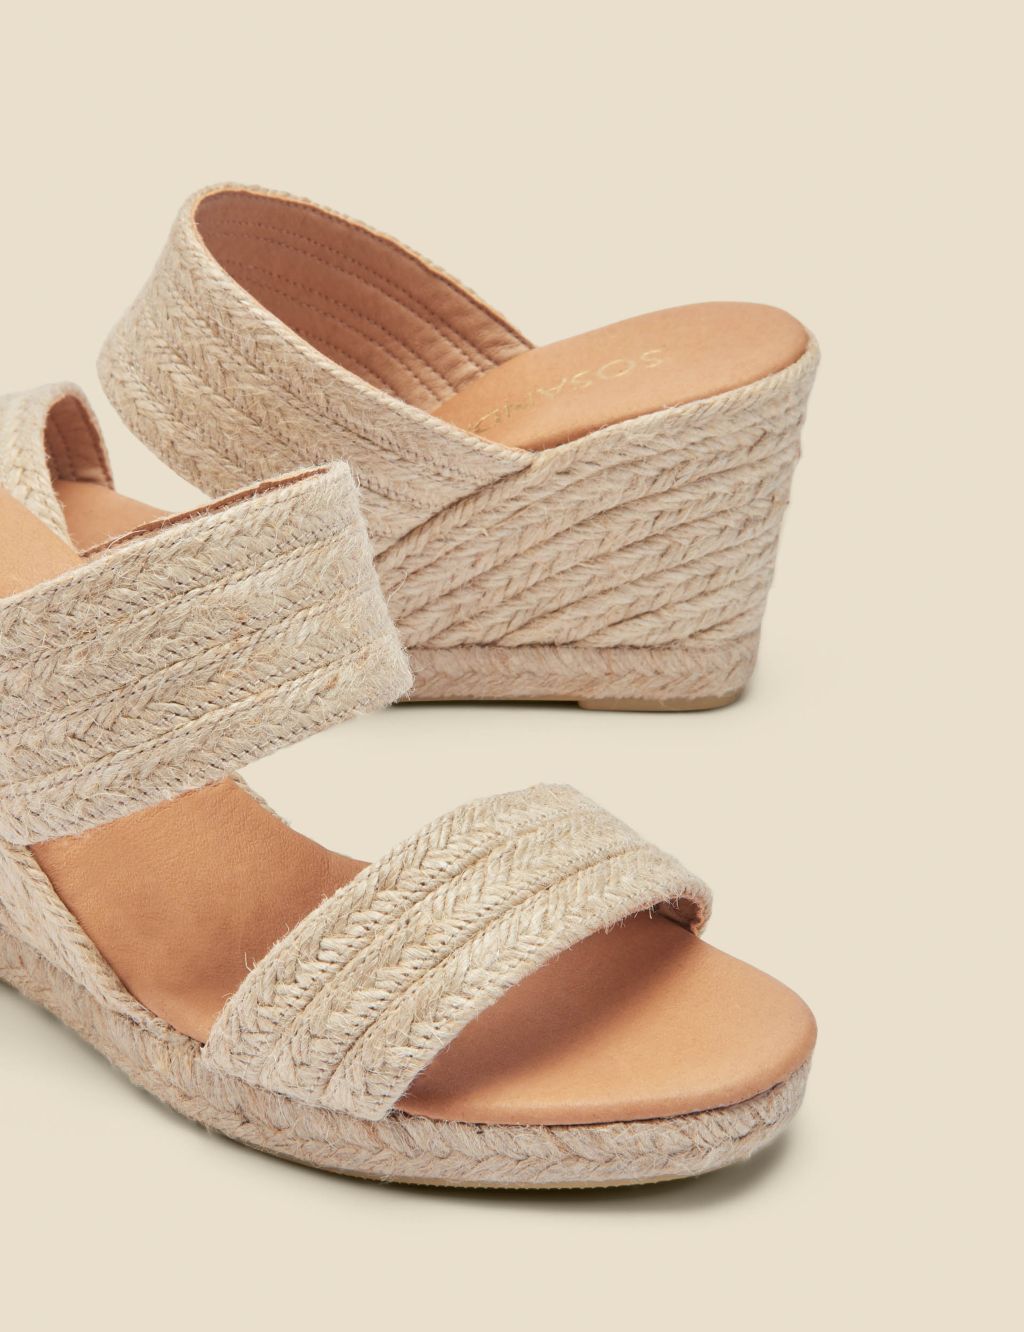 Woven Wedge Espadrille Mules image 2